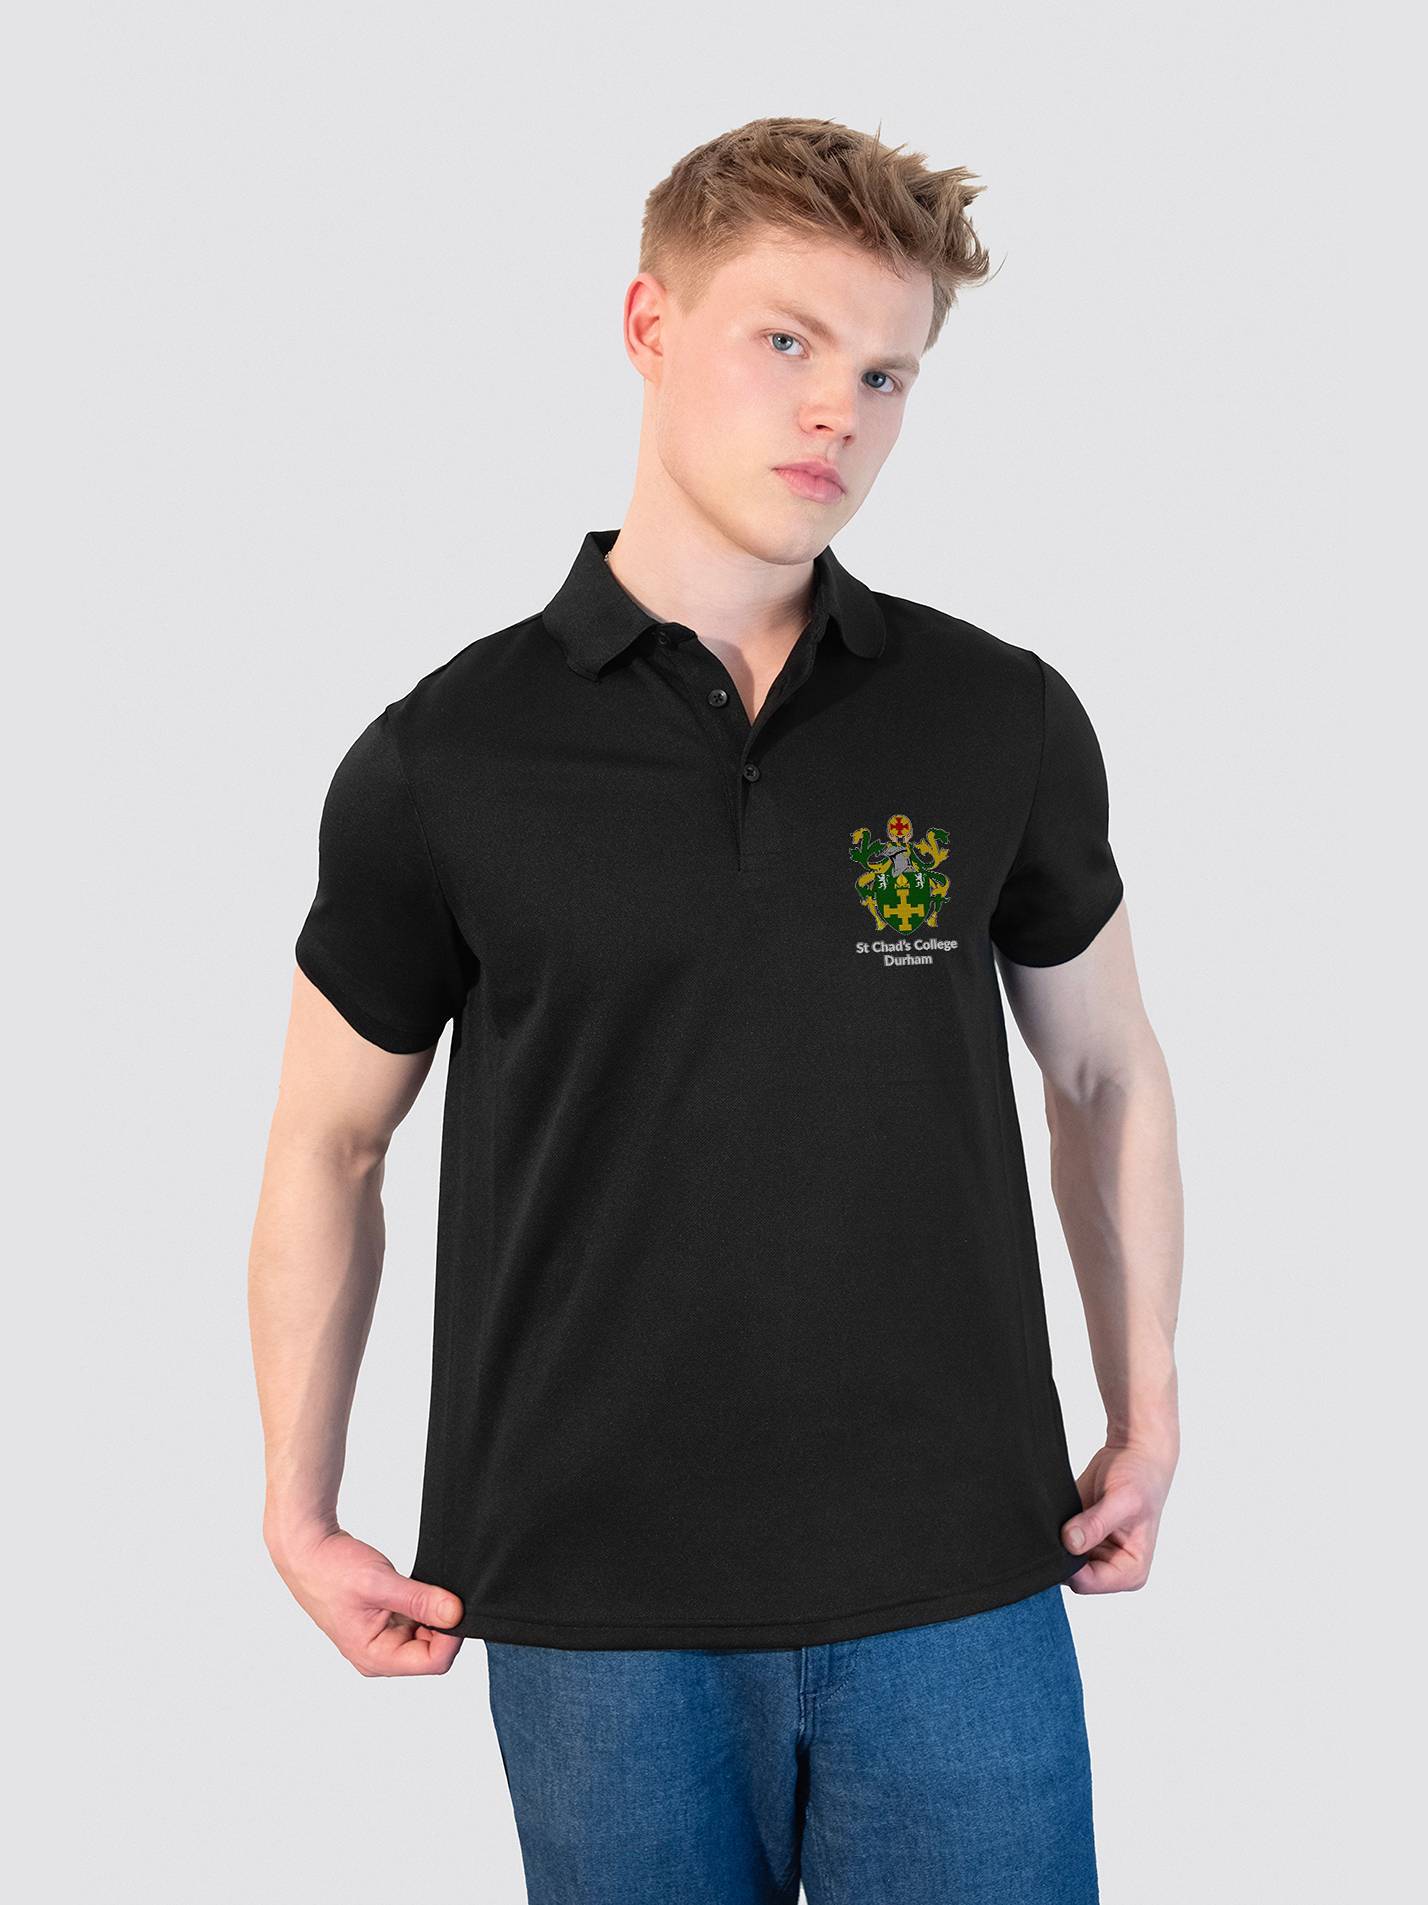 St Chad's College Durham Sustainable Men's Polo Shirt